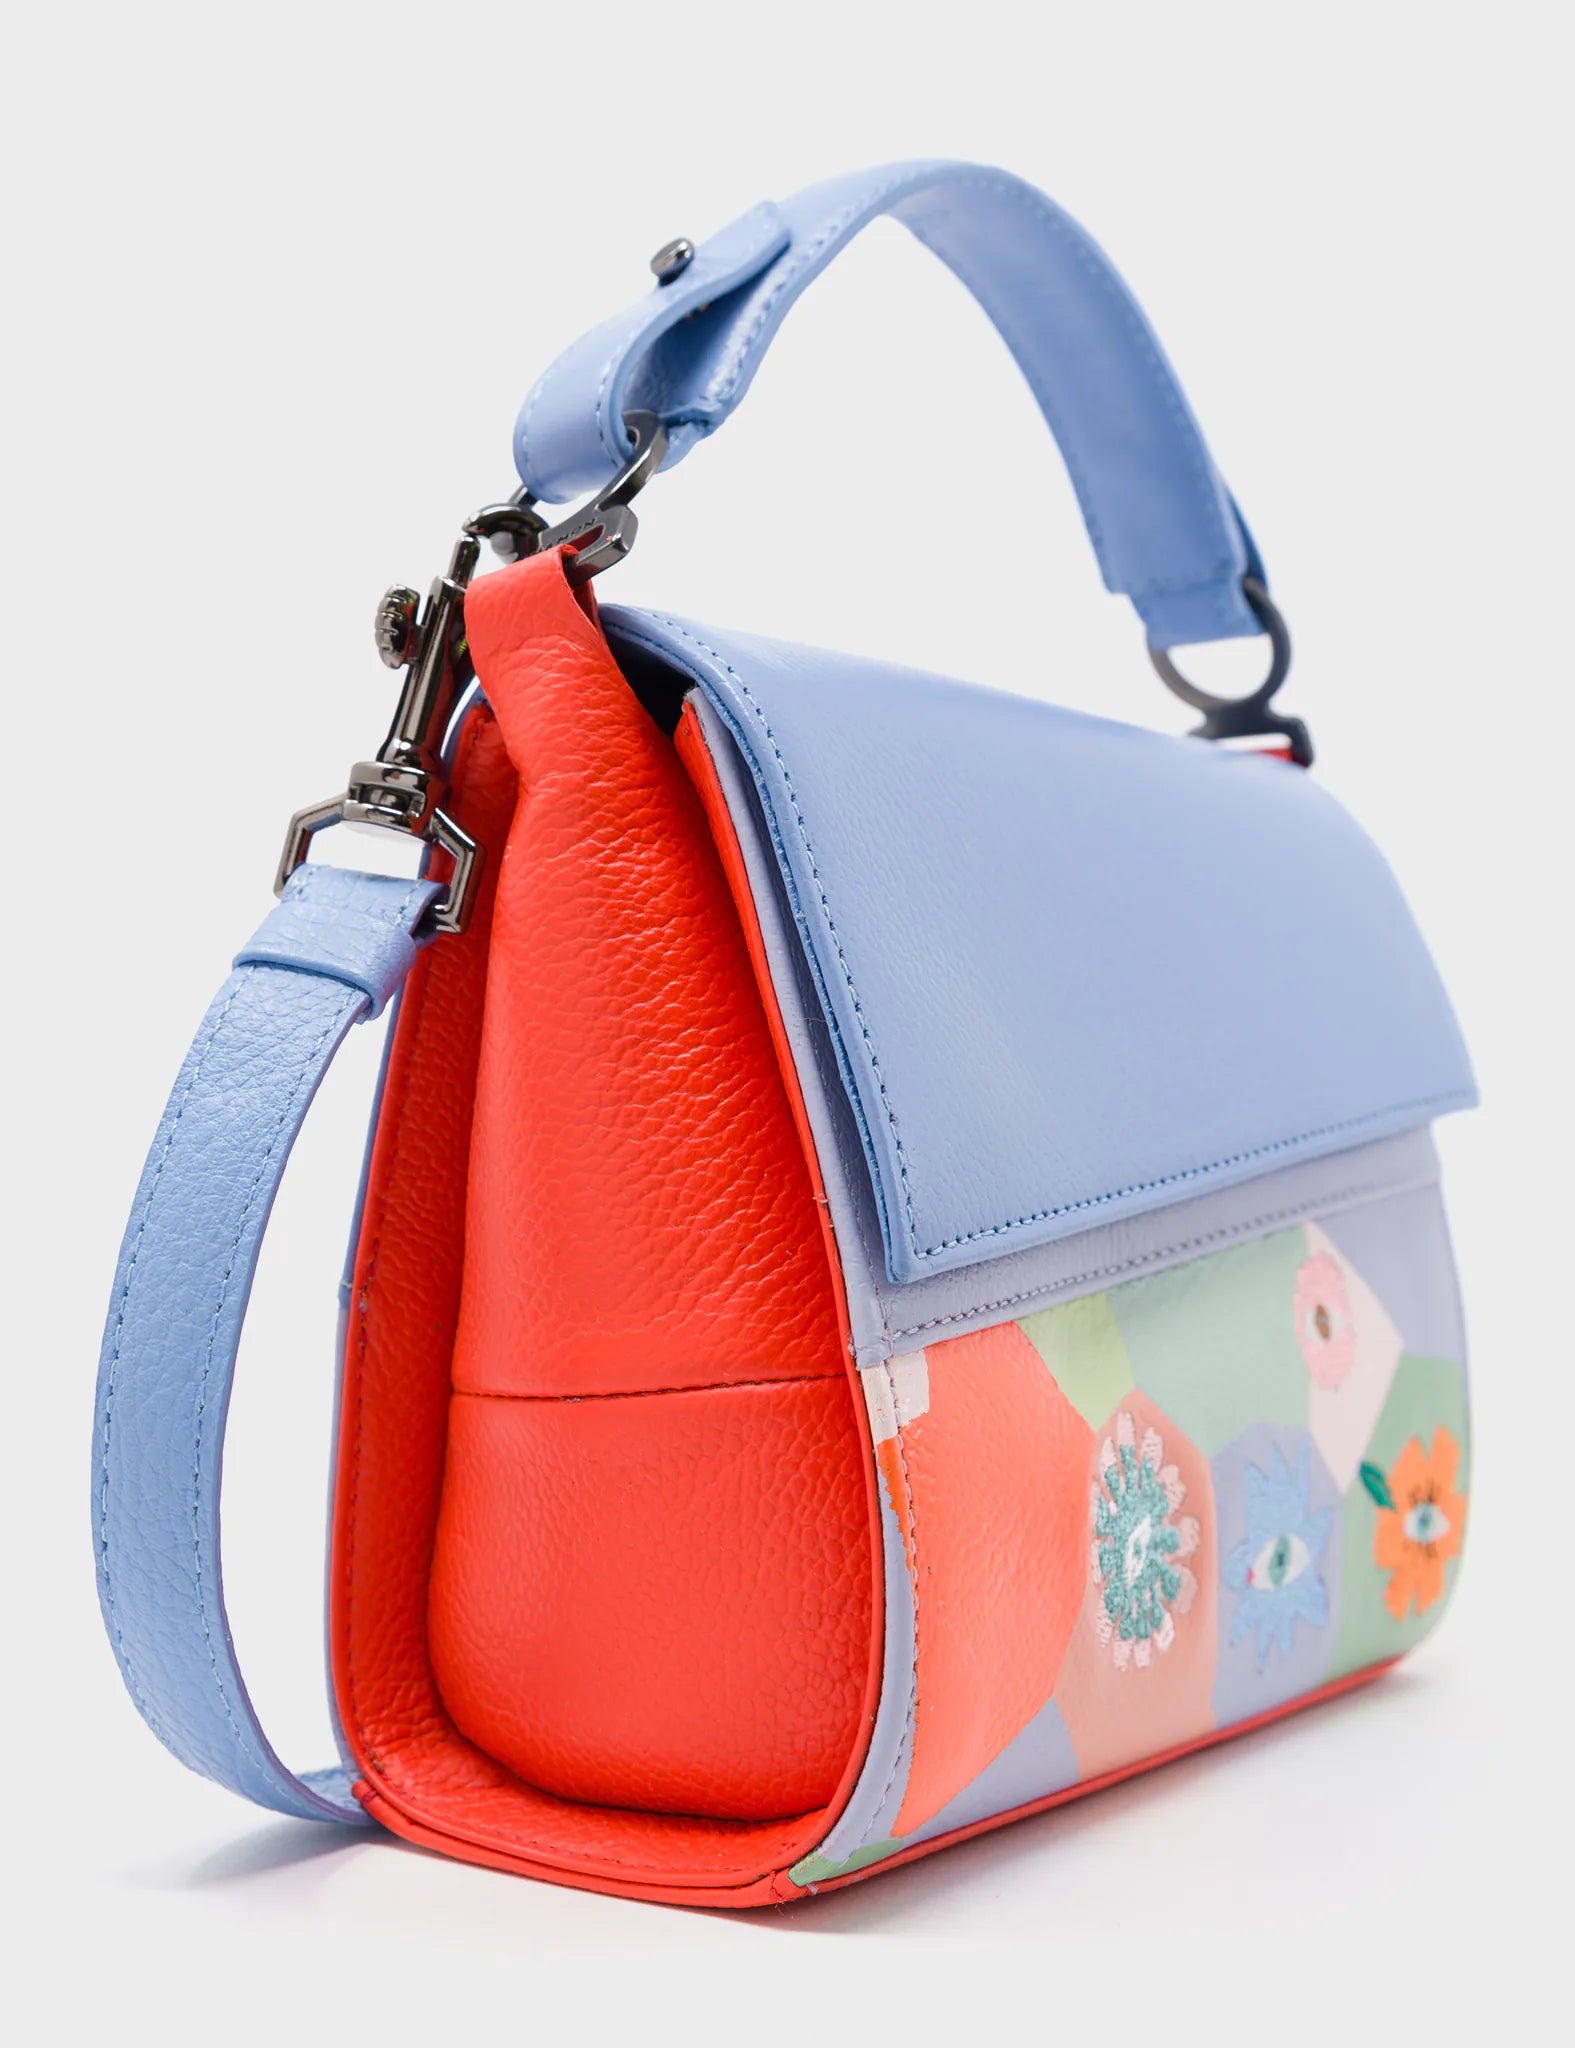 Micro Crossbody Handbag Blue and Red Leather - Camouflaged and flowers Embroidery - Side